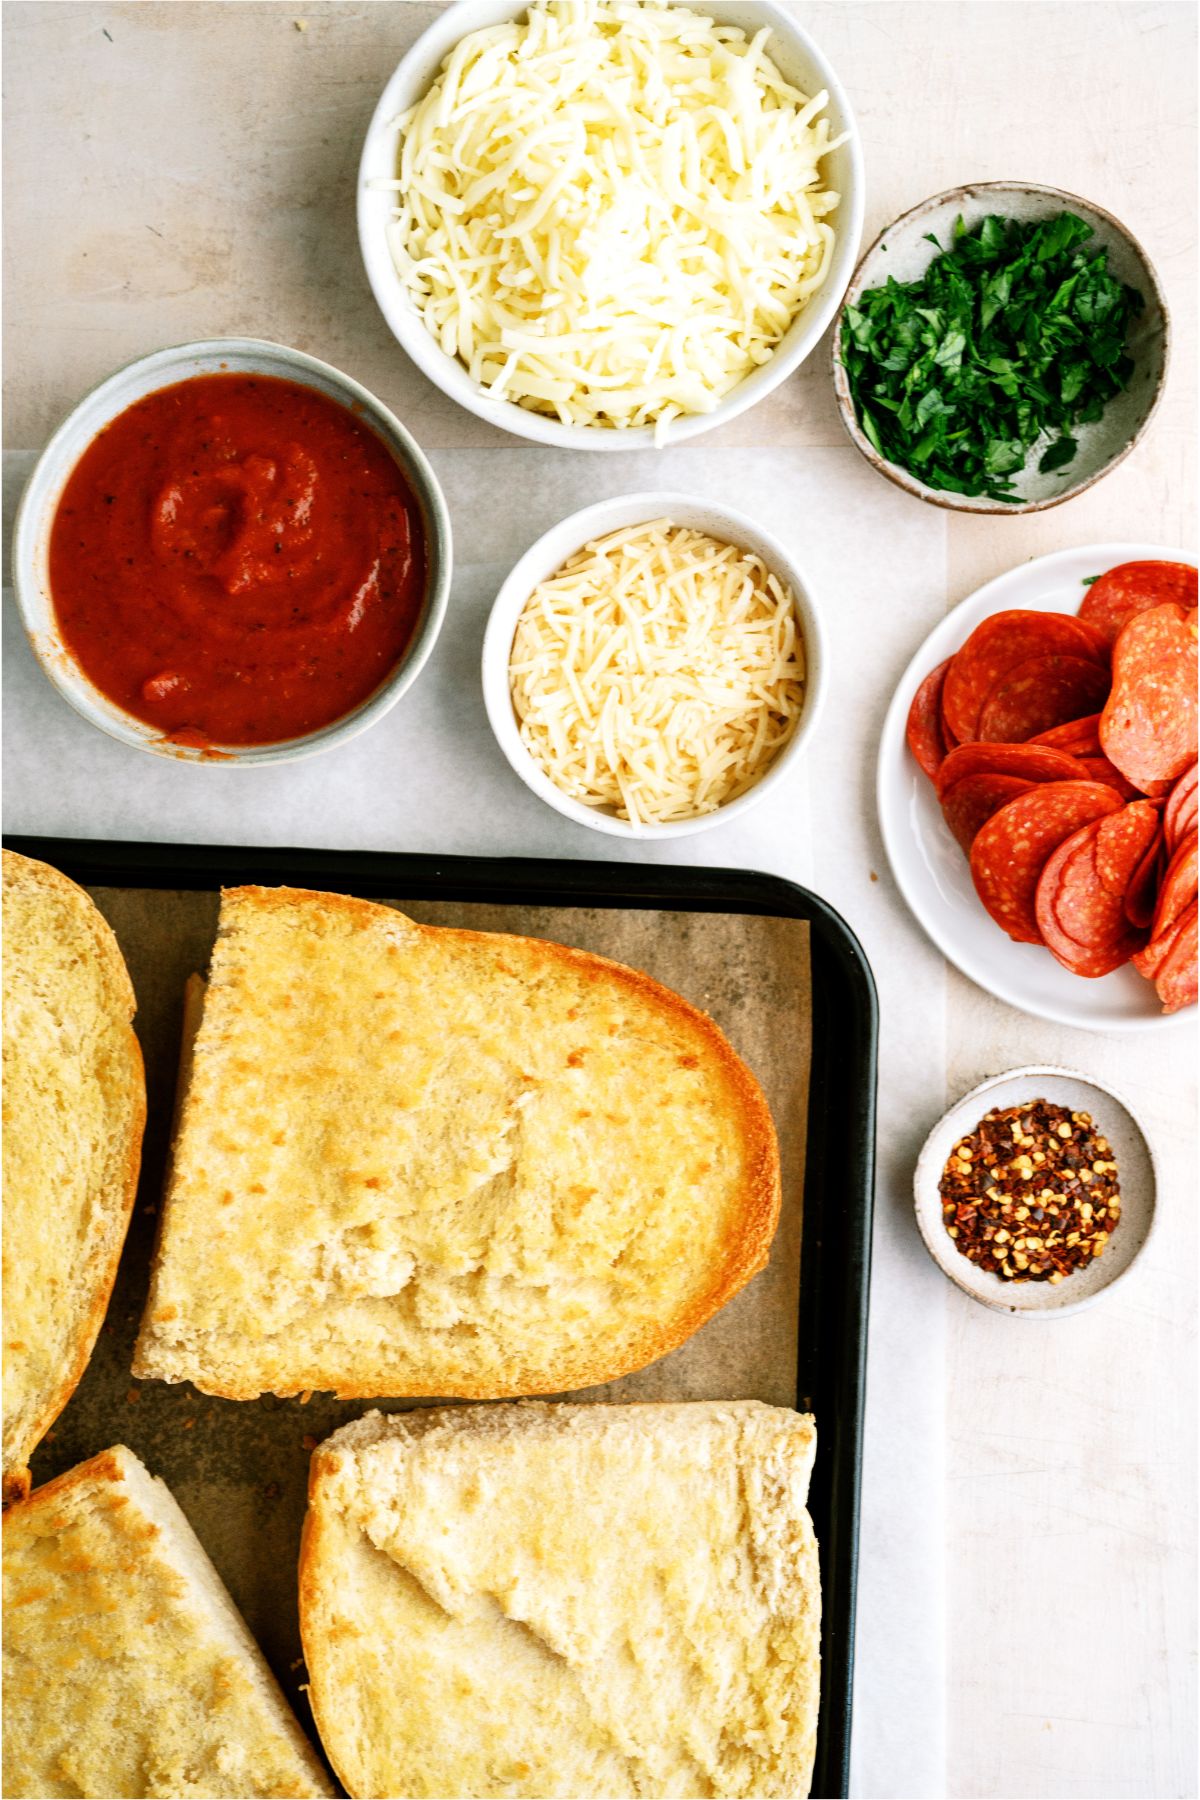 Ingredients needed to make Air Fryer French Bread Pizza